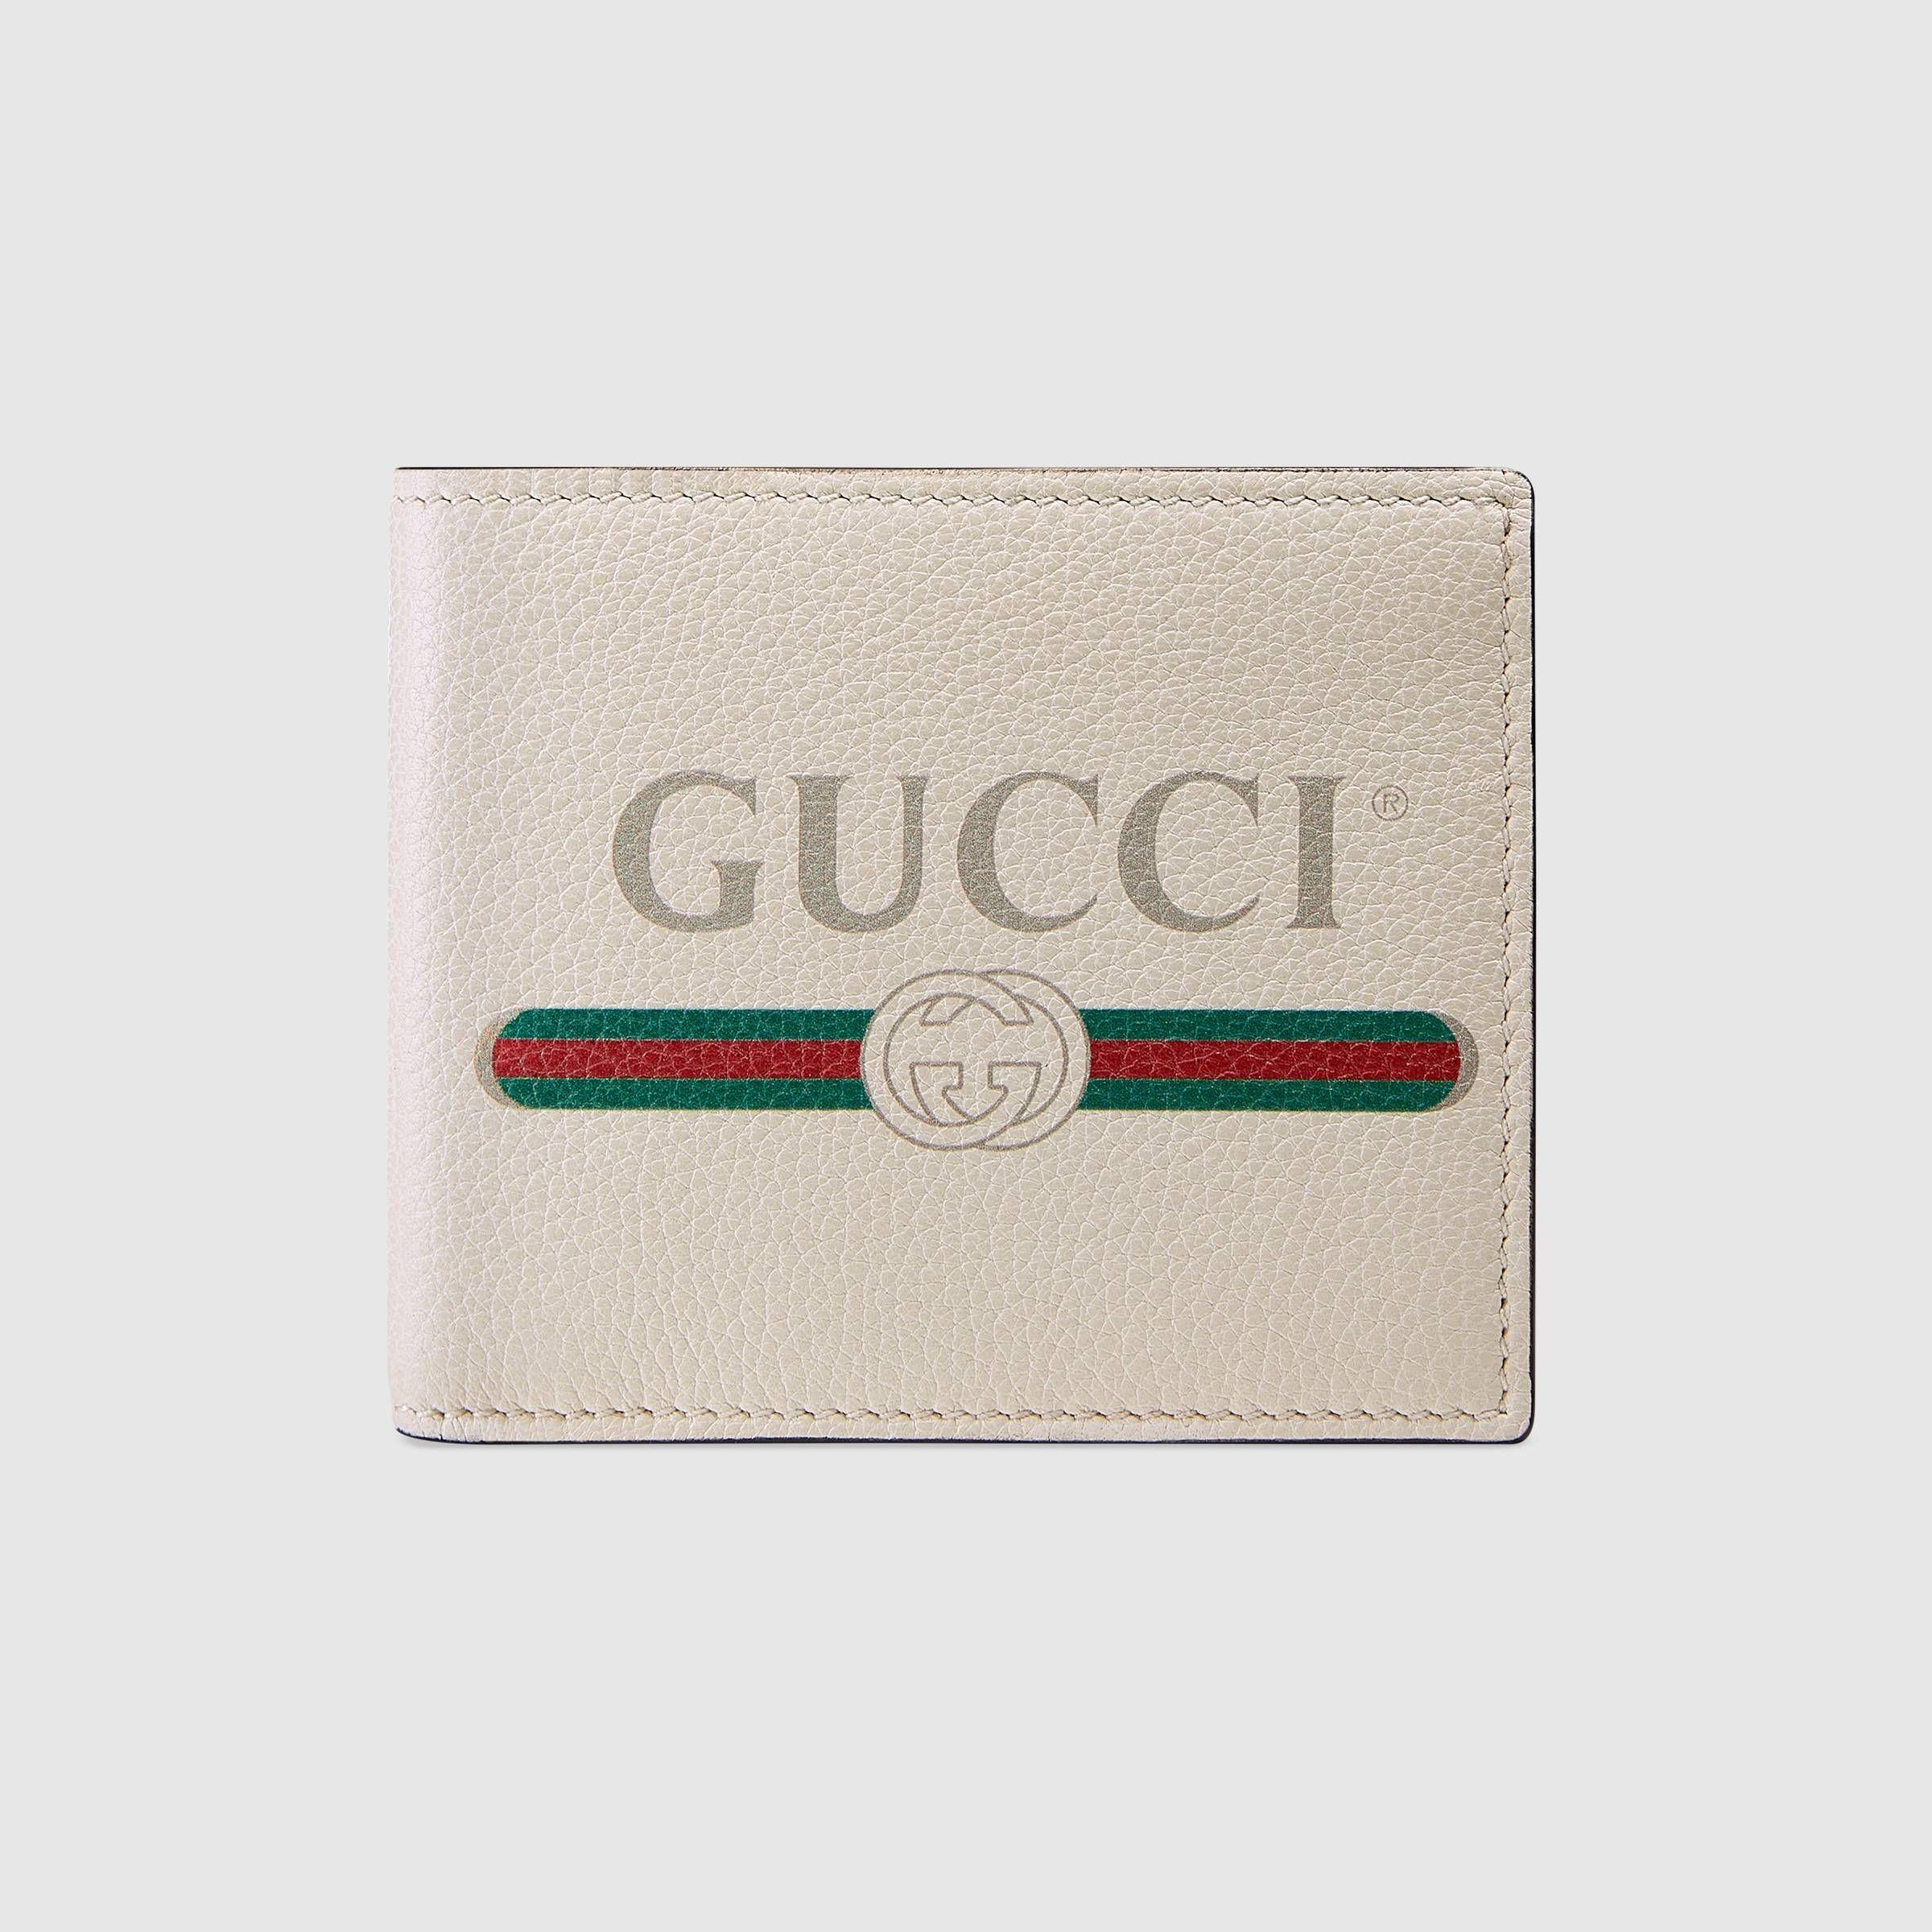 Colorful Gucci Logo - Gucci Print Leather Bi Fold Wallet Available Colors: White Leather